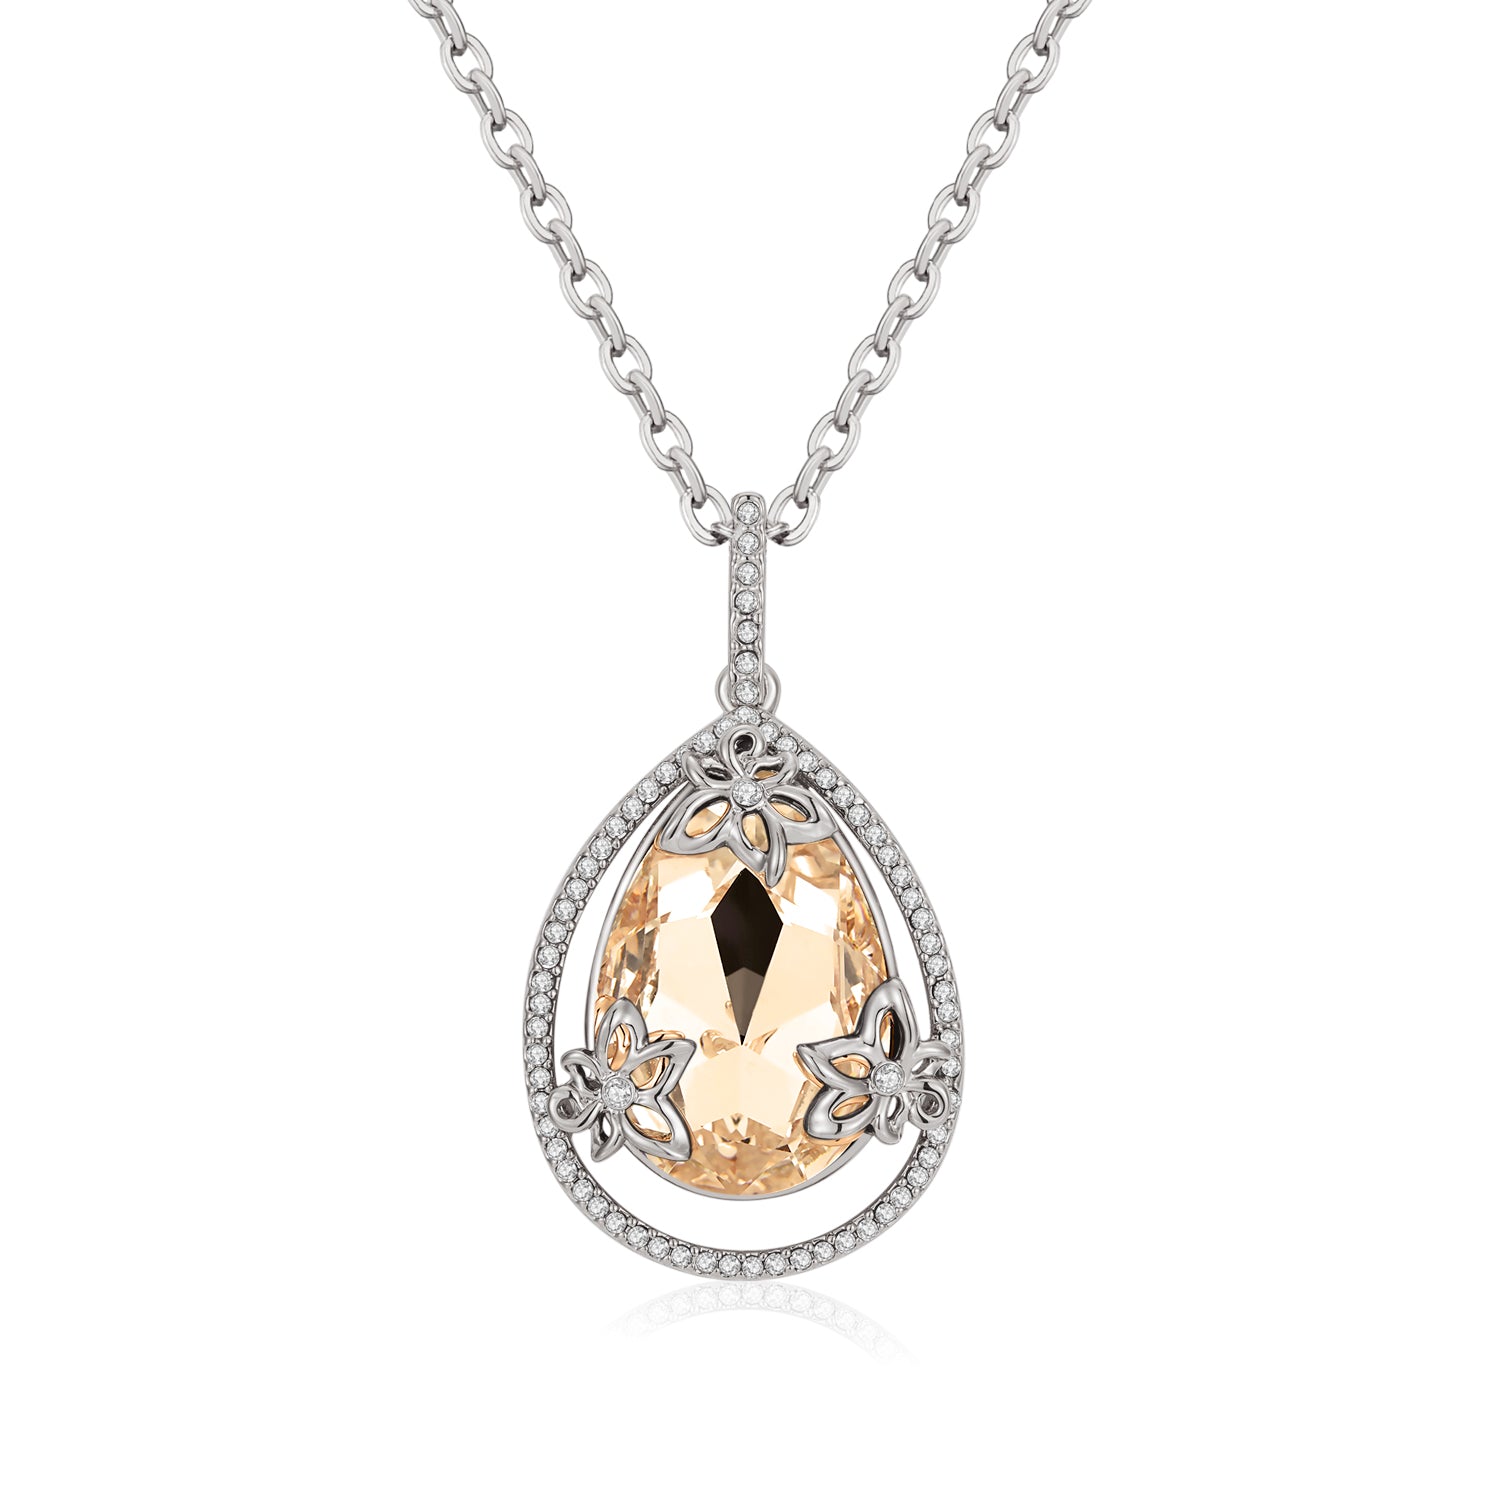 Beautiful legend VICACCI Mermaid tears Pendant necklace Embellished with crystals